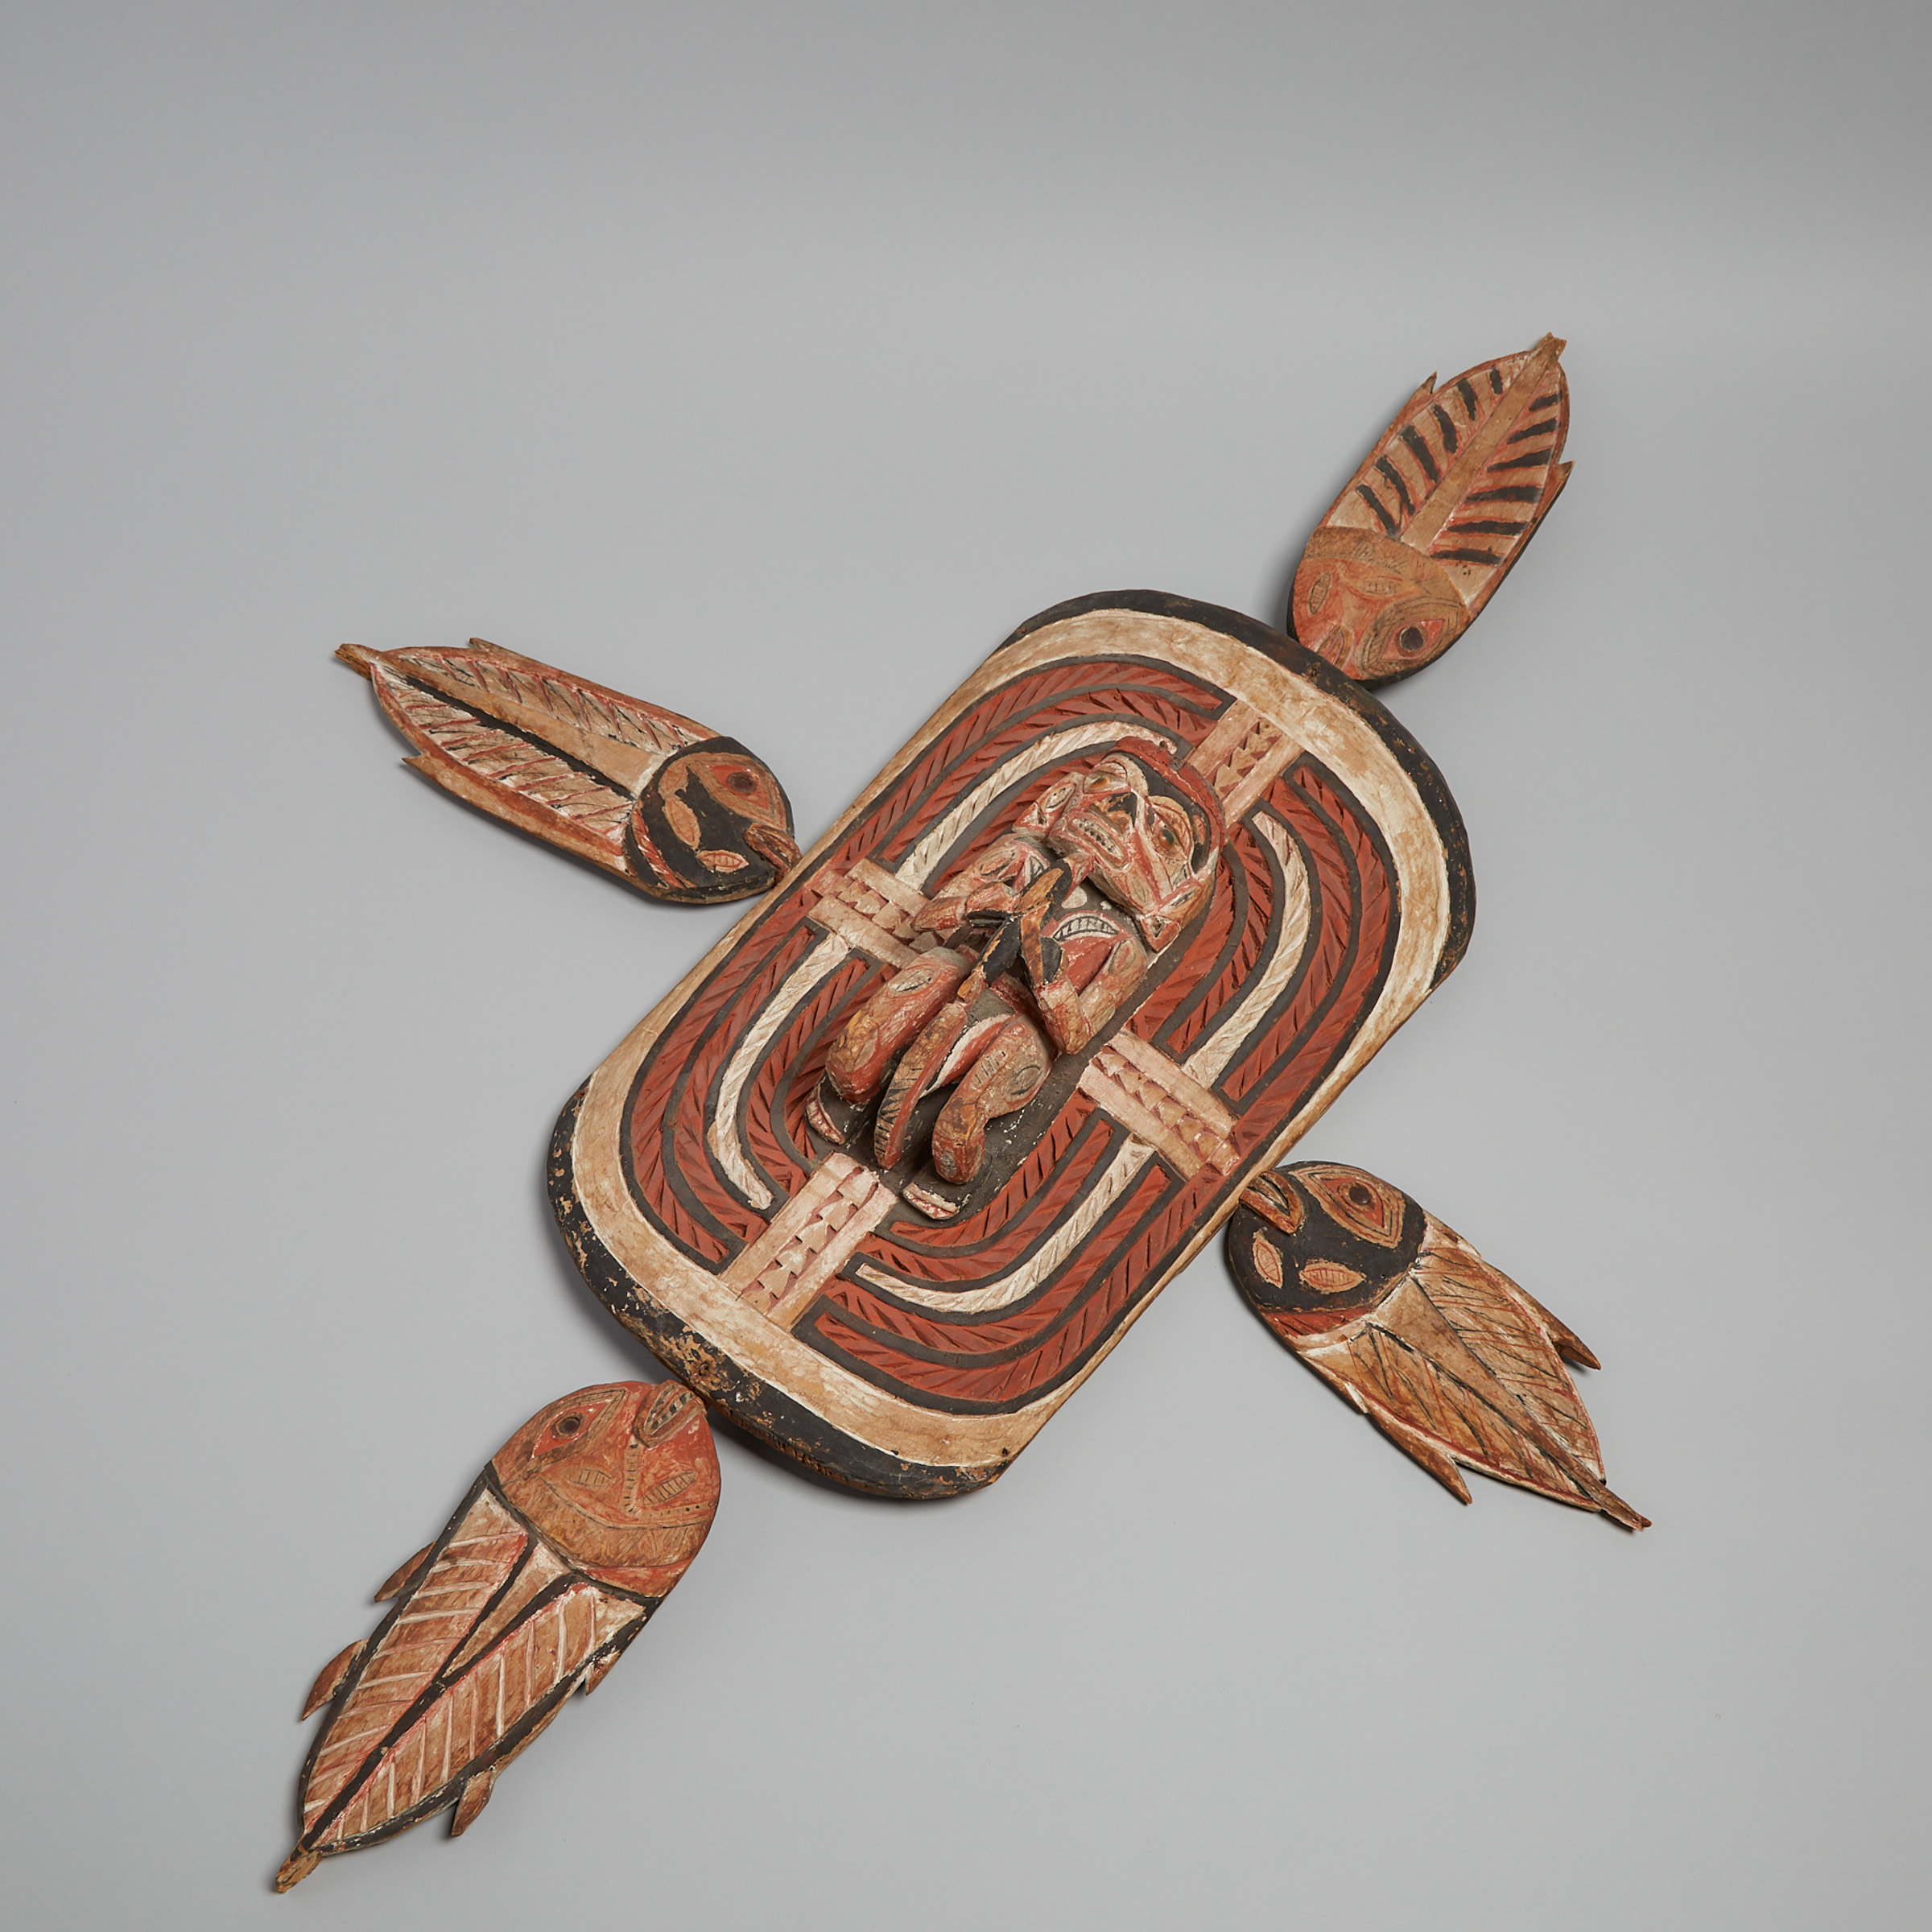 New Ireland Carved Wood and Polychromed Figural Plaque, Papua New Guinea, possibly 19th/ early 20th century